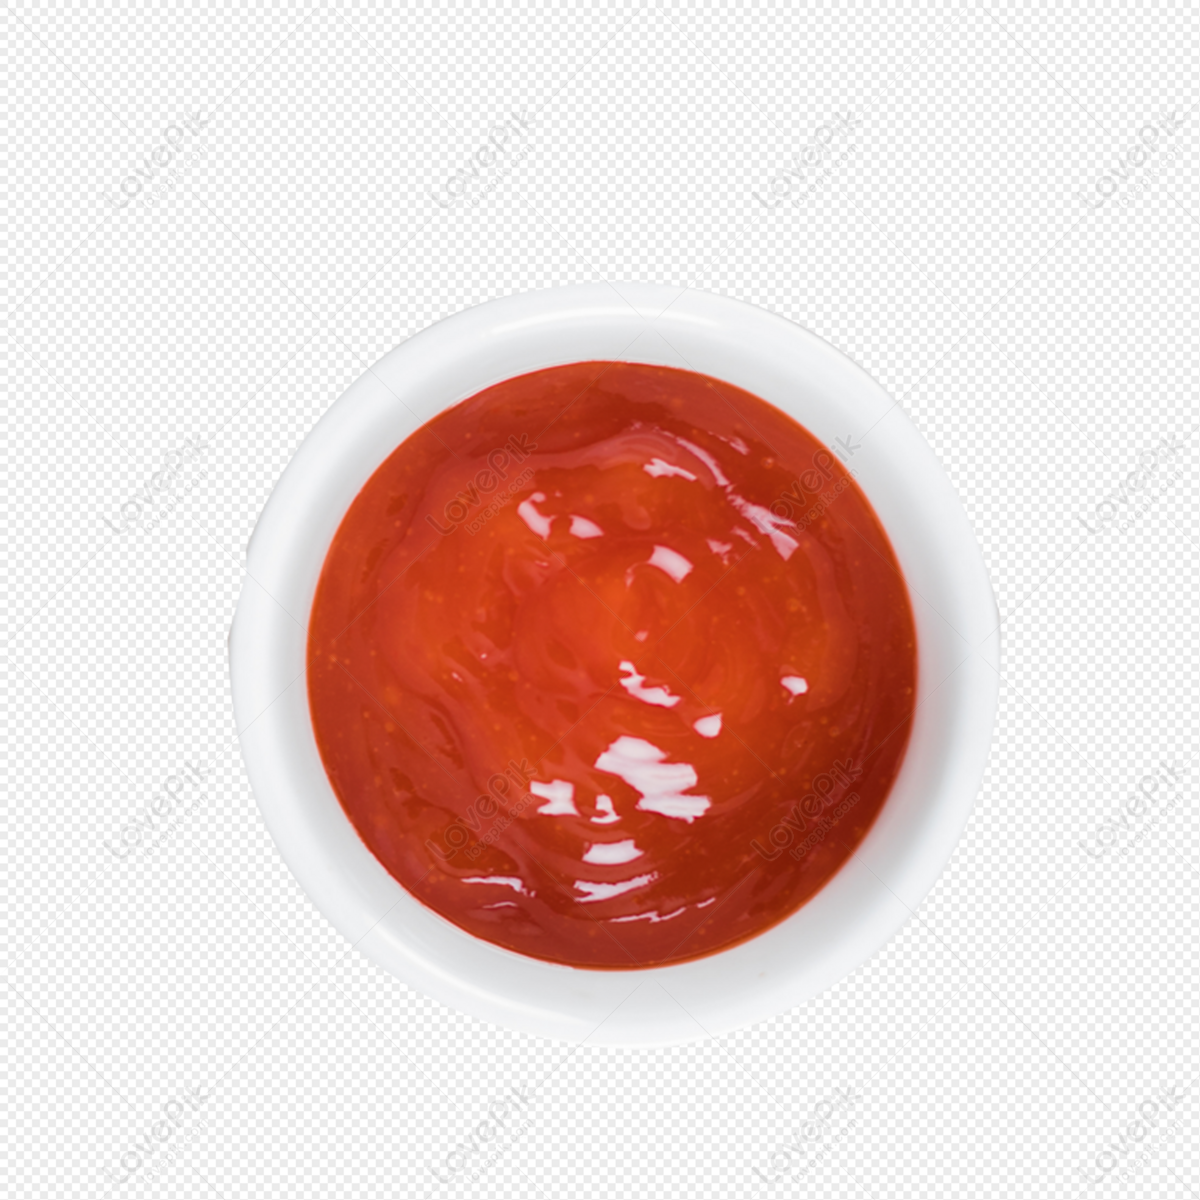 Ketchup PNG Image Free Download And Clipart Image For Free Download -  Lovepik | 401102621